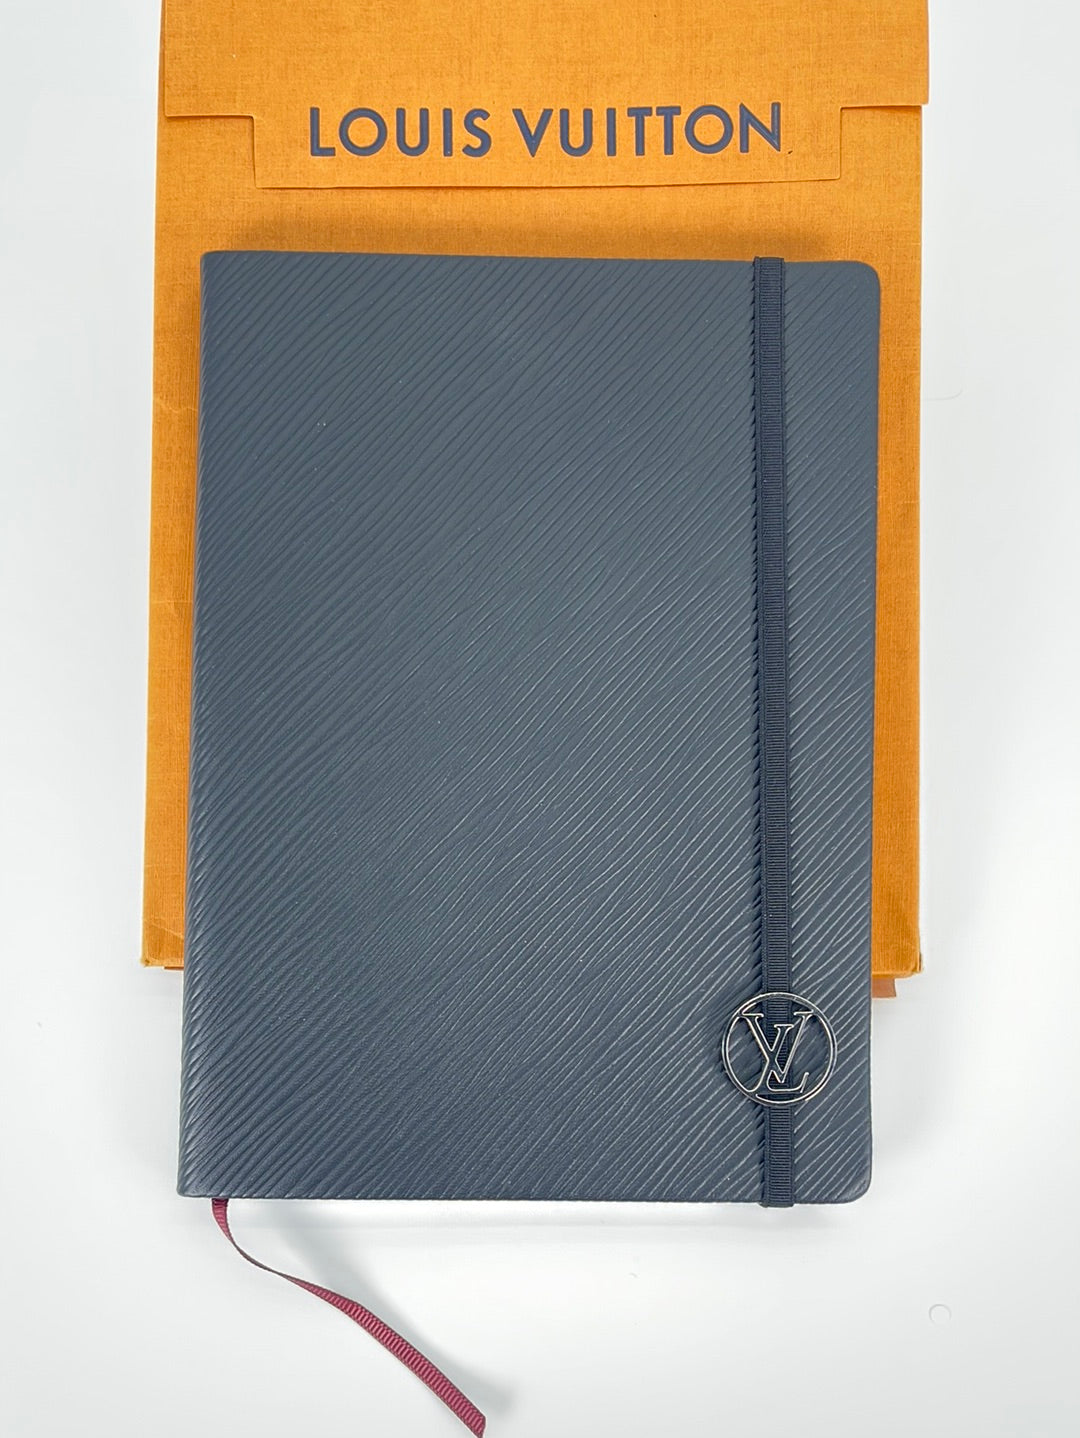 Louis Vuitton Gustave MM Notebook in black Epi leather with silver embossing